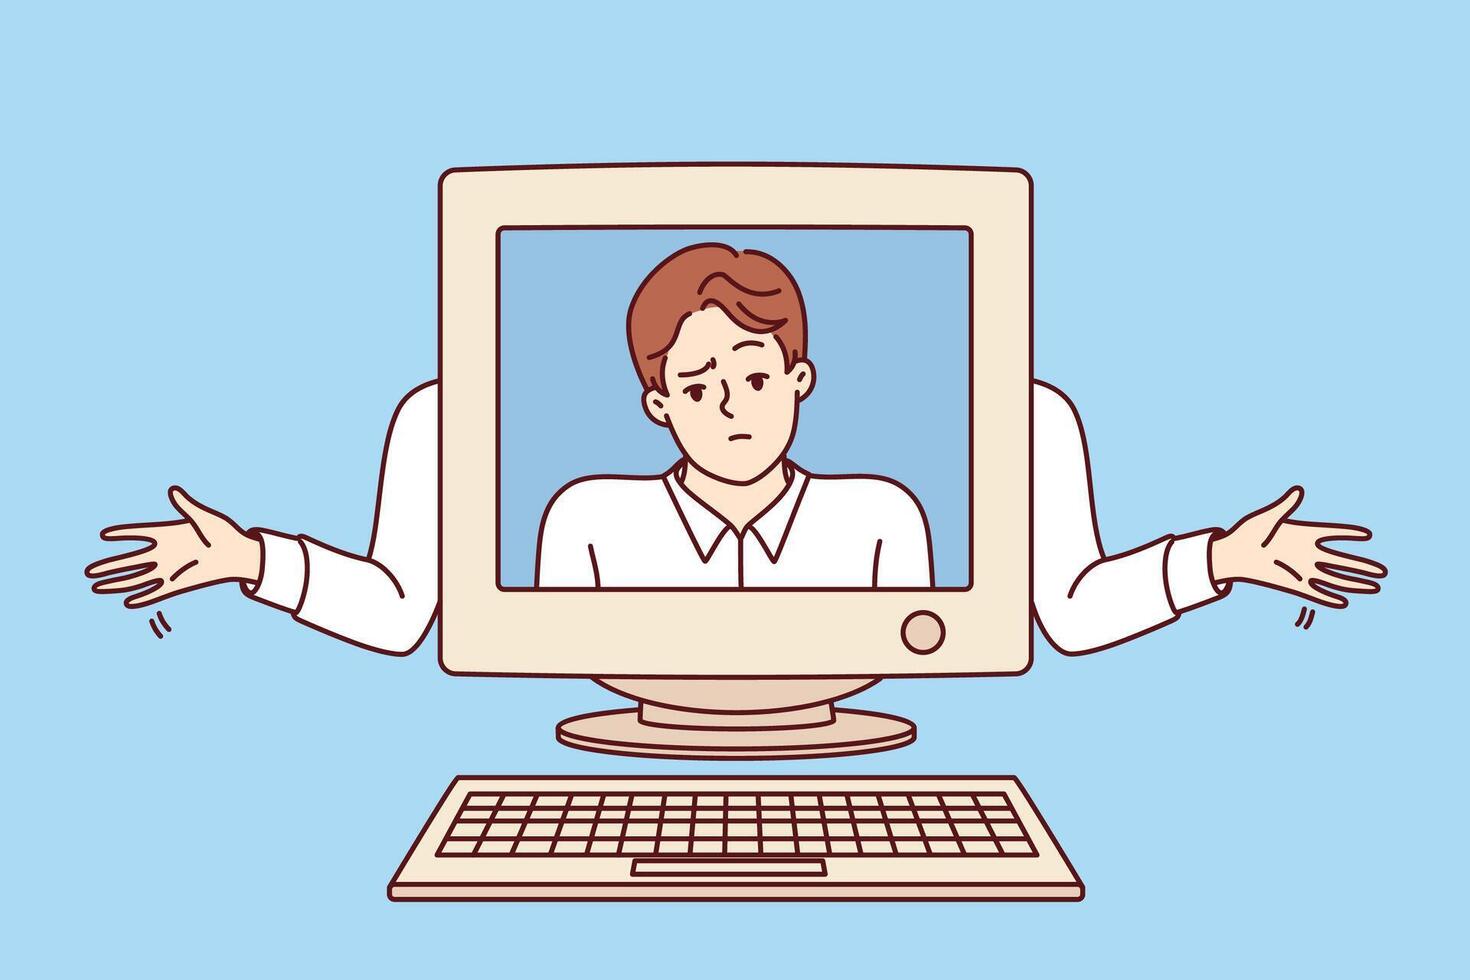 Old computer with disappointed man on screen, as metaphor outdated technologies. vector